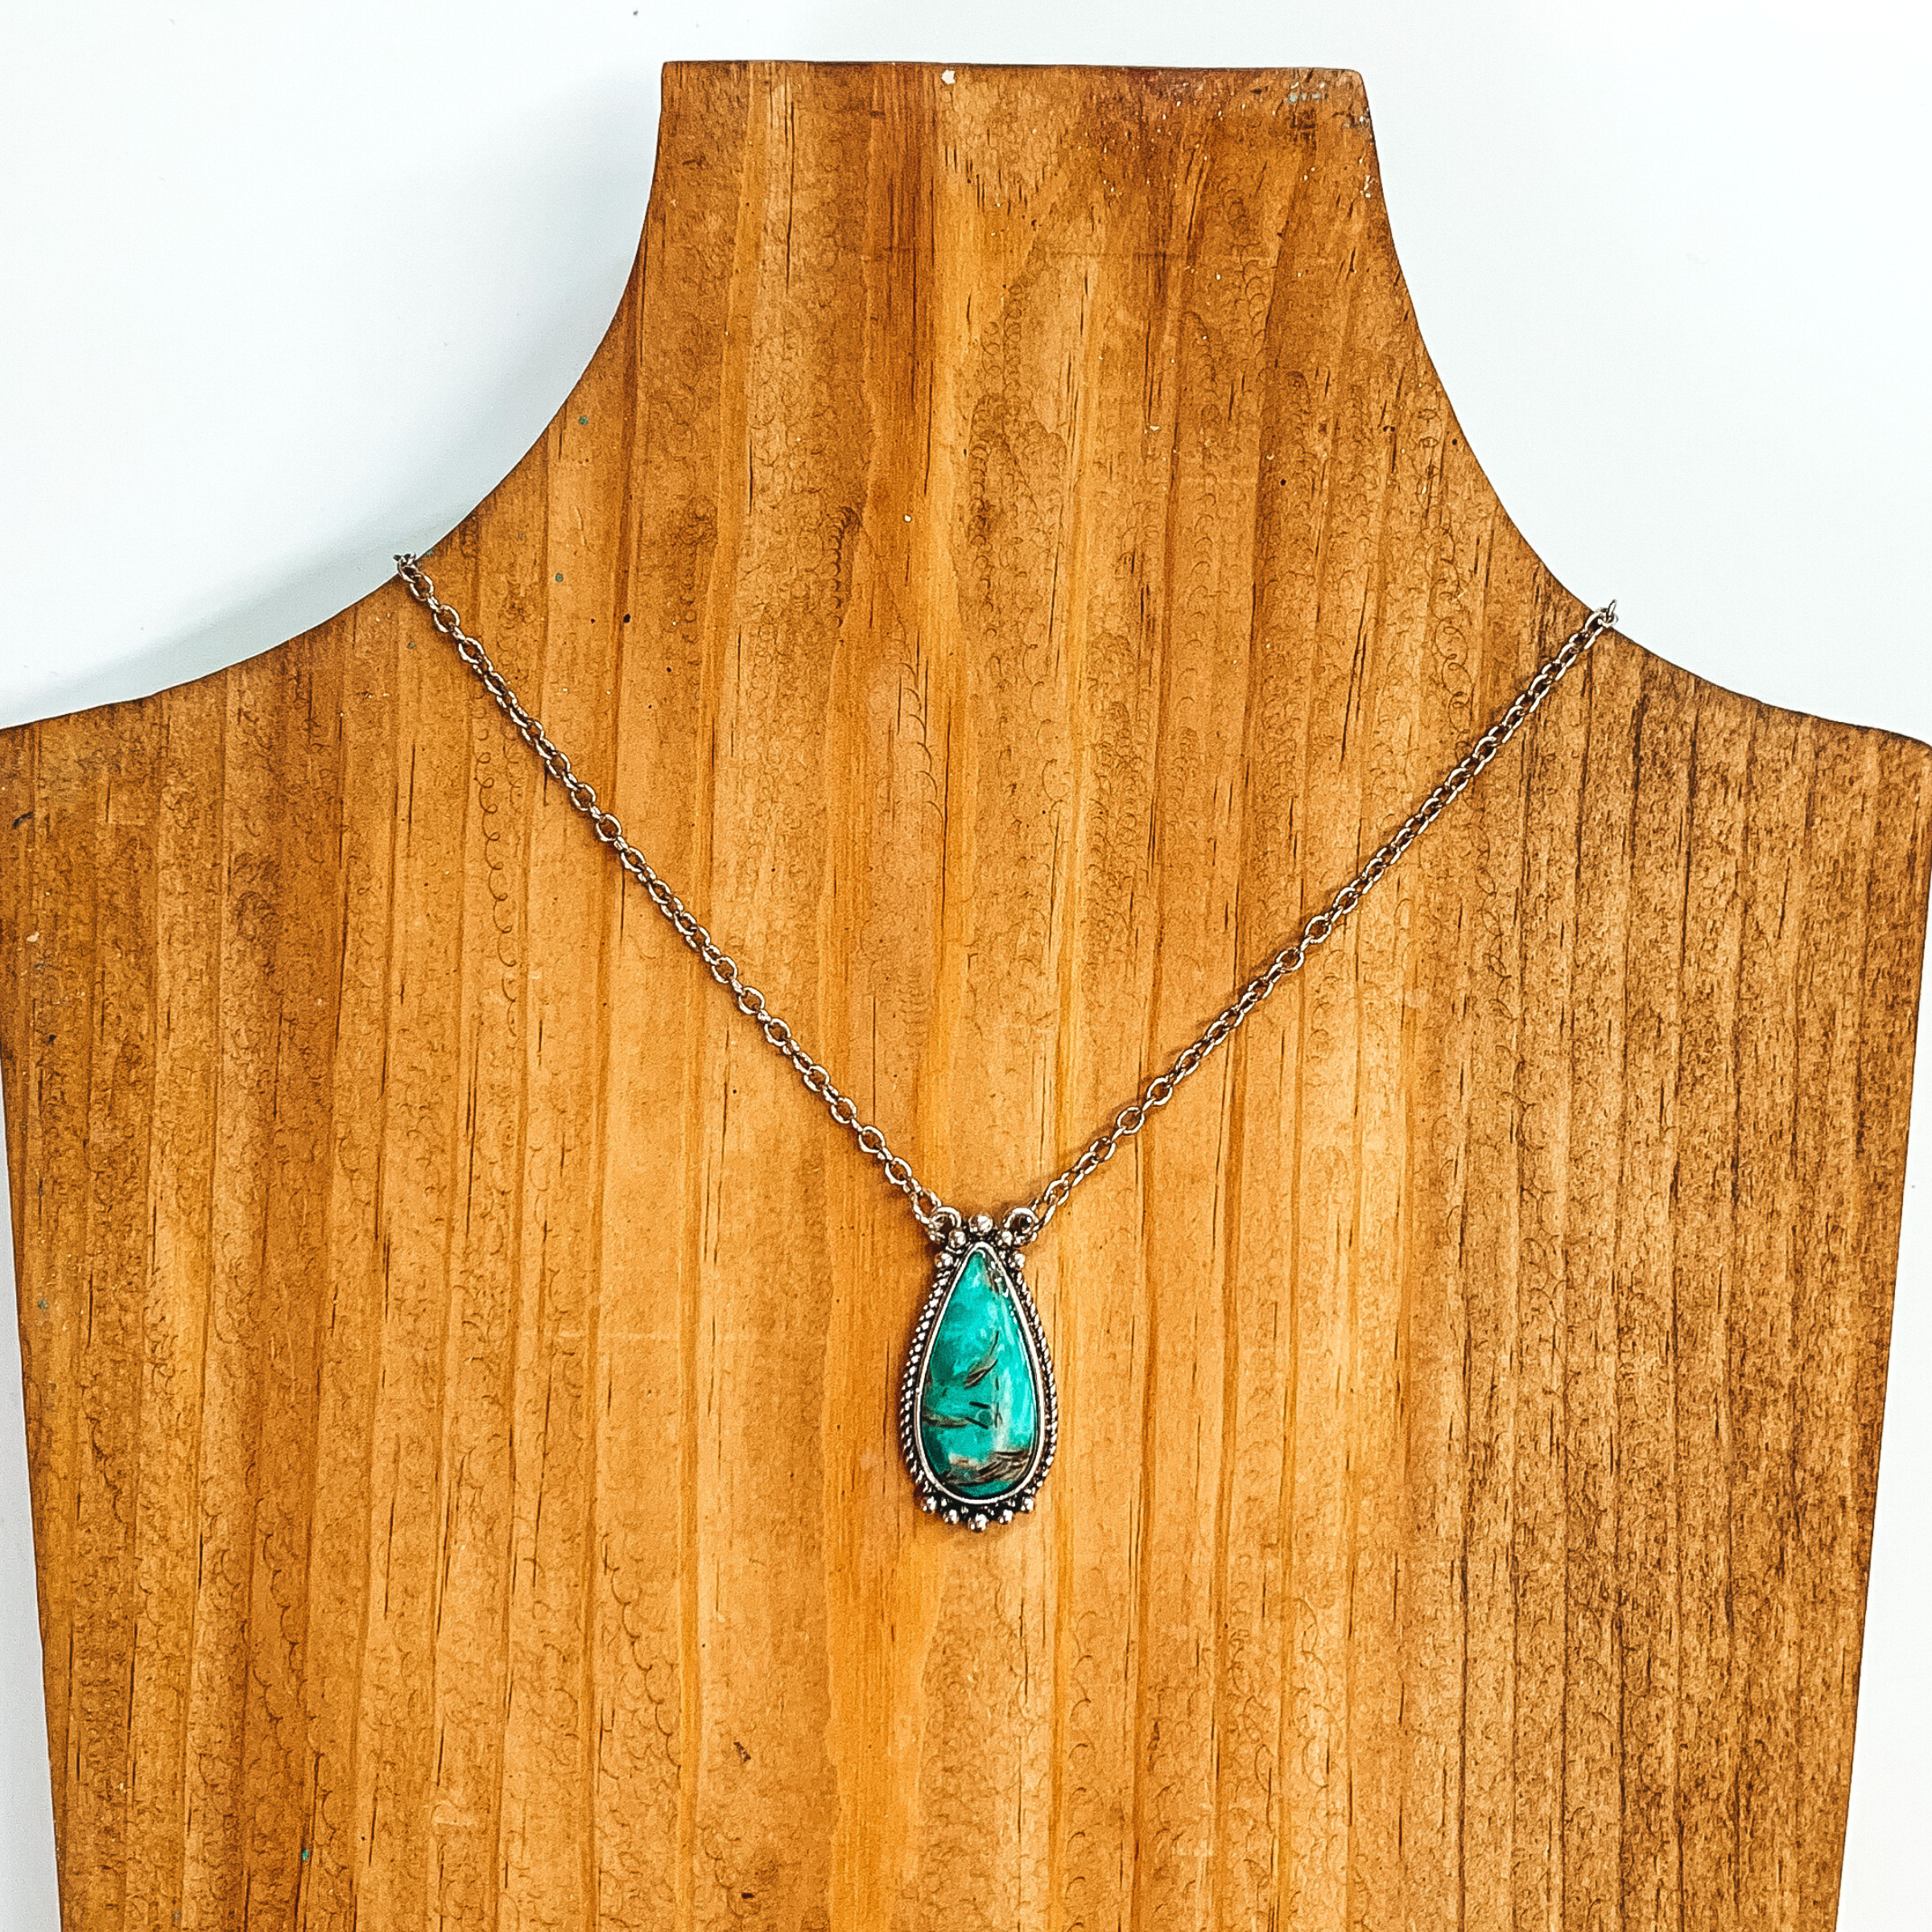 Silver chain necklace with a turquoise teardrop pendant with a silver outline. This necklace is pictured on a wood necklace holder on a white background. 